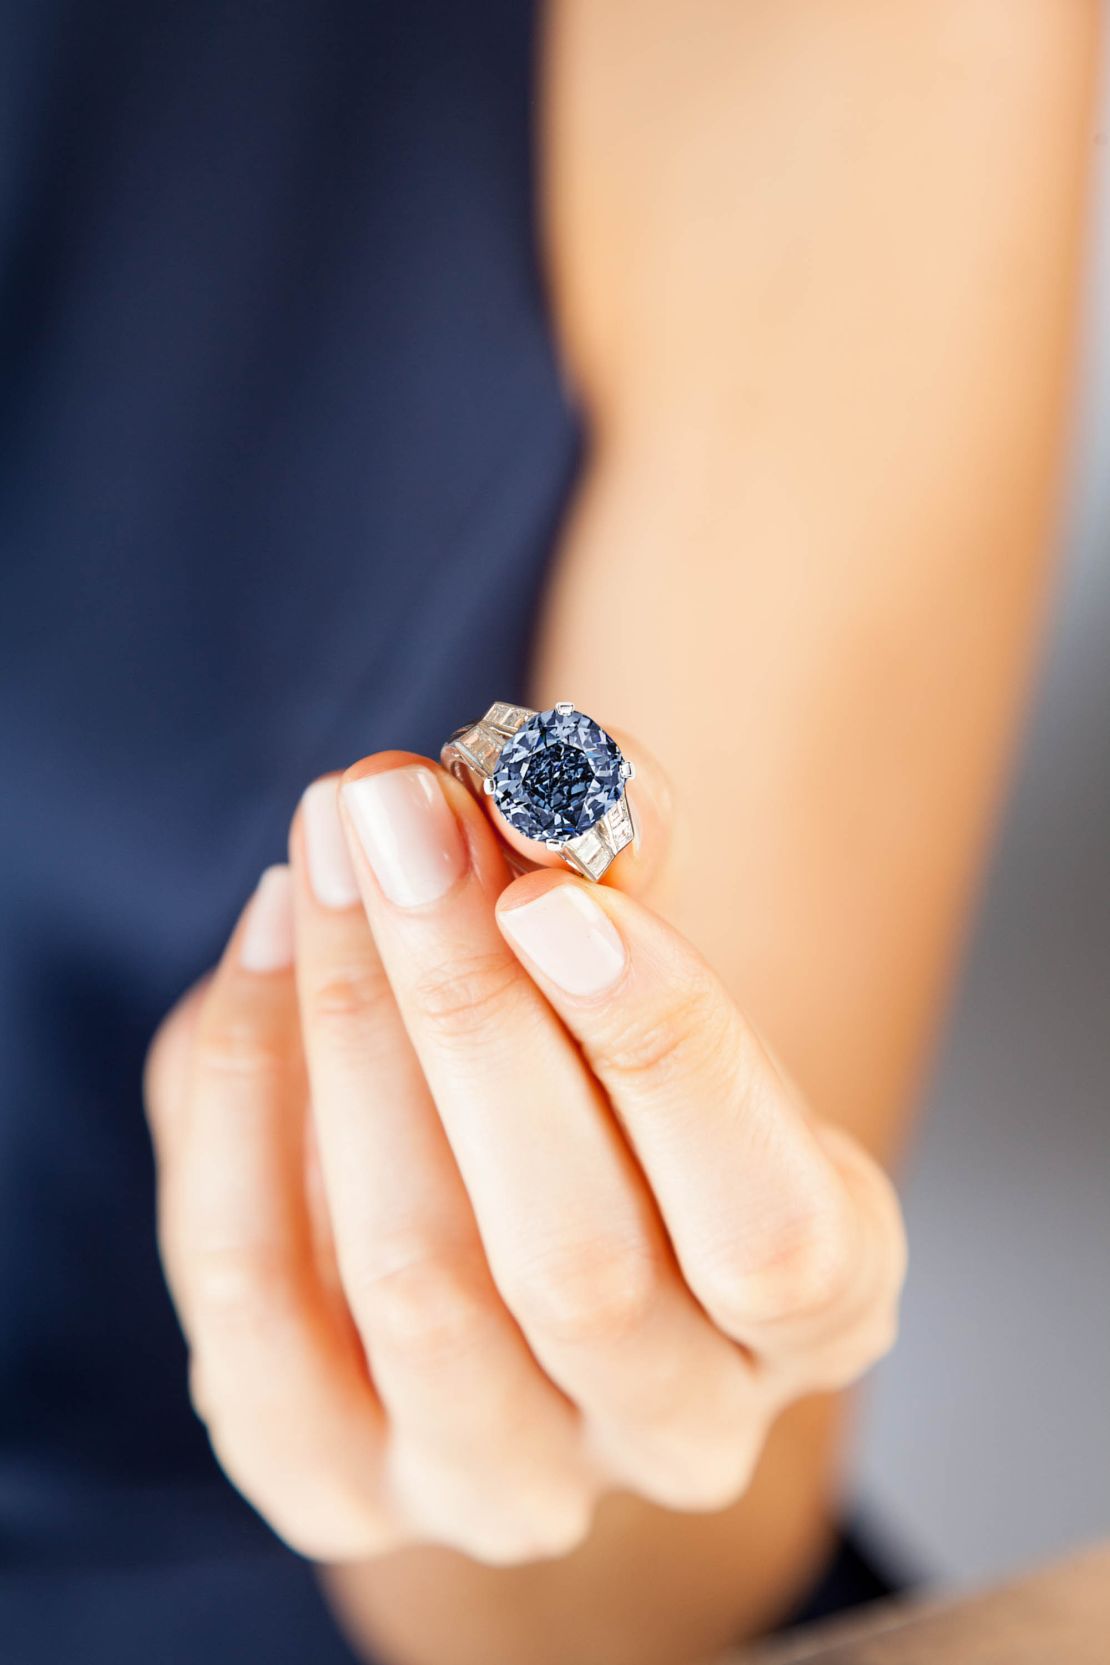 A Fancy Deep Blue, 9.54-carats diamond that belonged to the late Shirley Temple failed to sell when it hit the auction block in March 2016.  